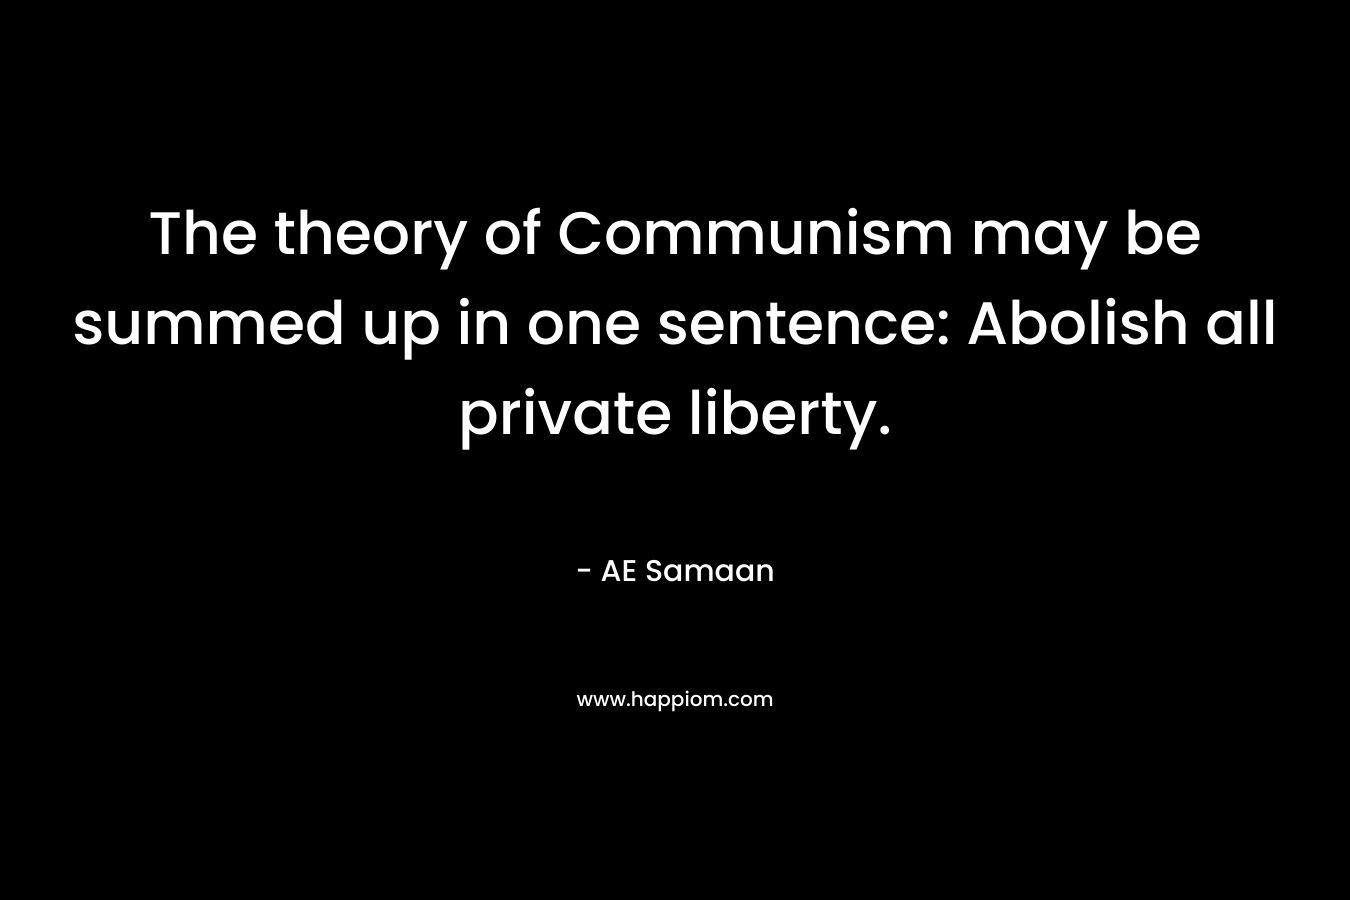 The theory of Communism may be summed up in one sentence: Abolish all private liberty. – AE Samaan